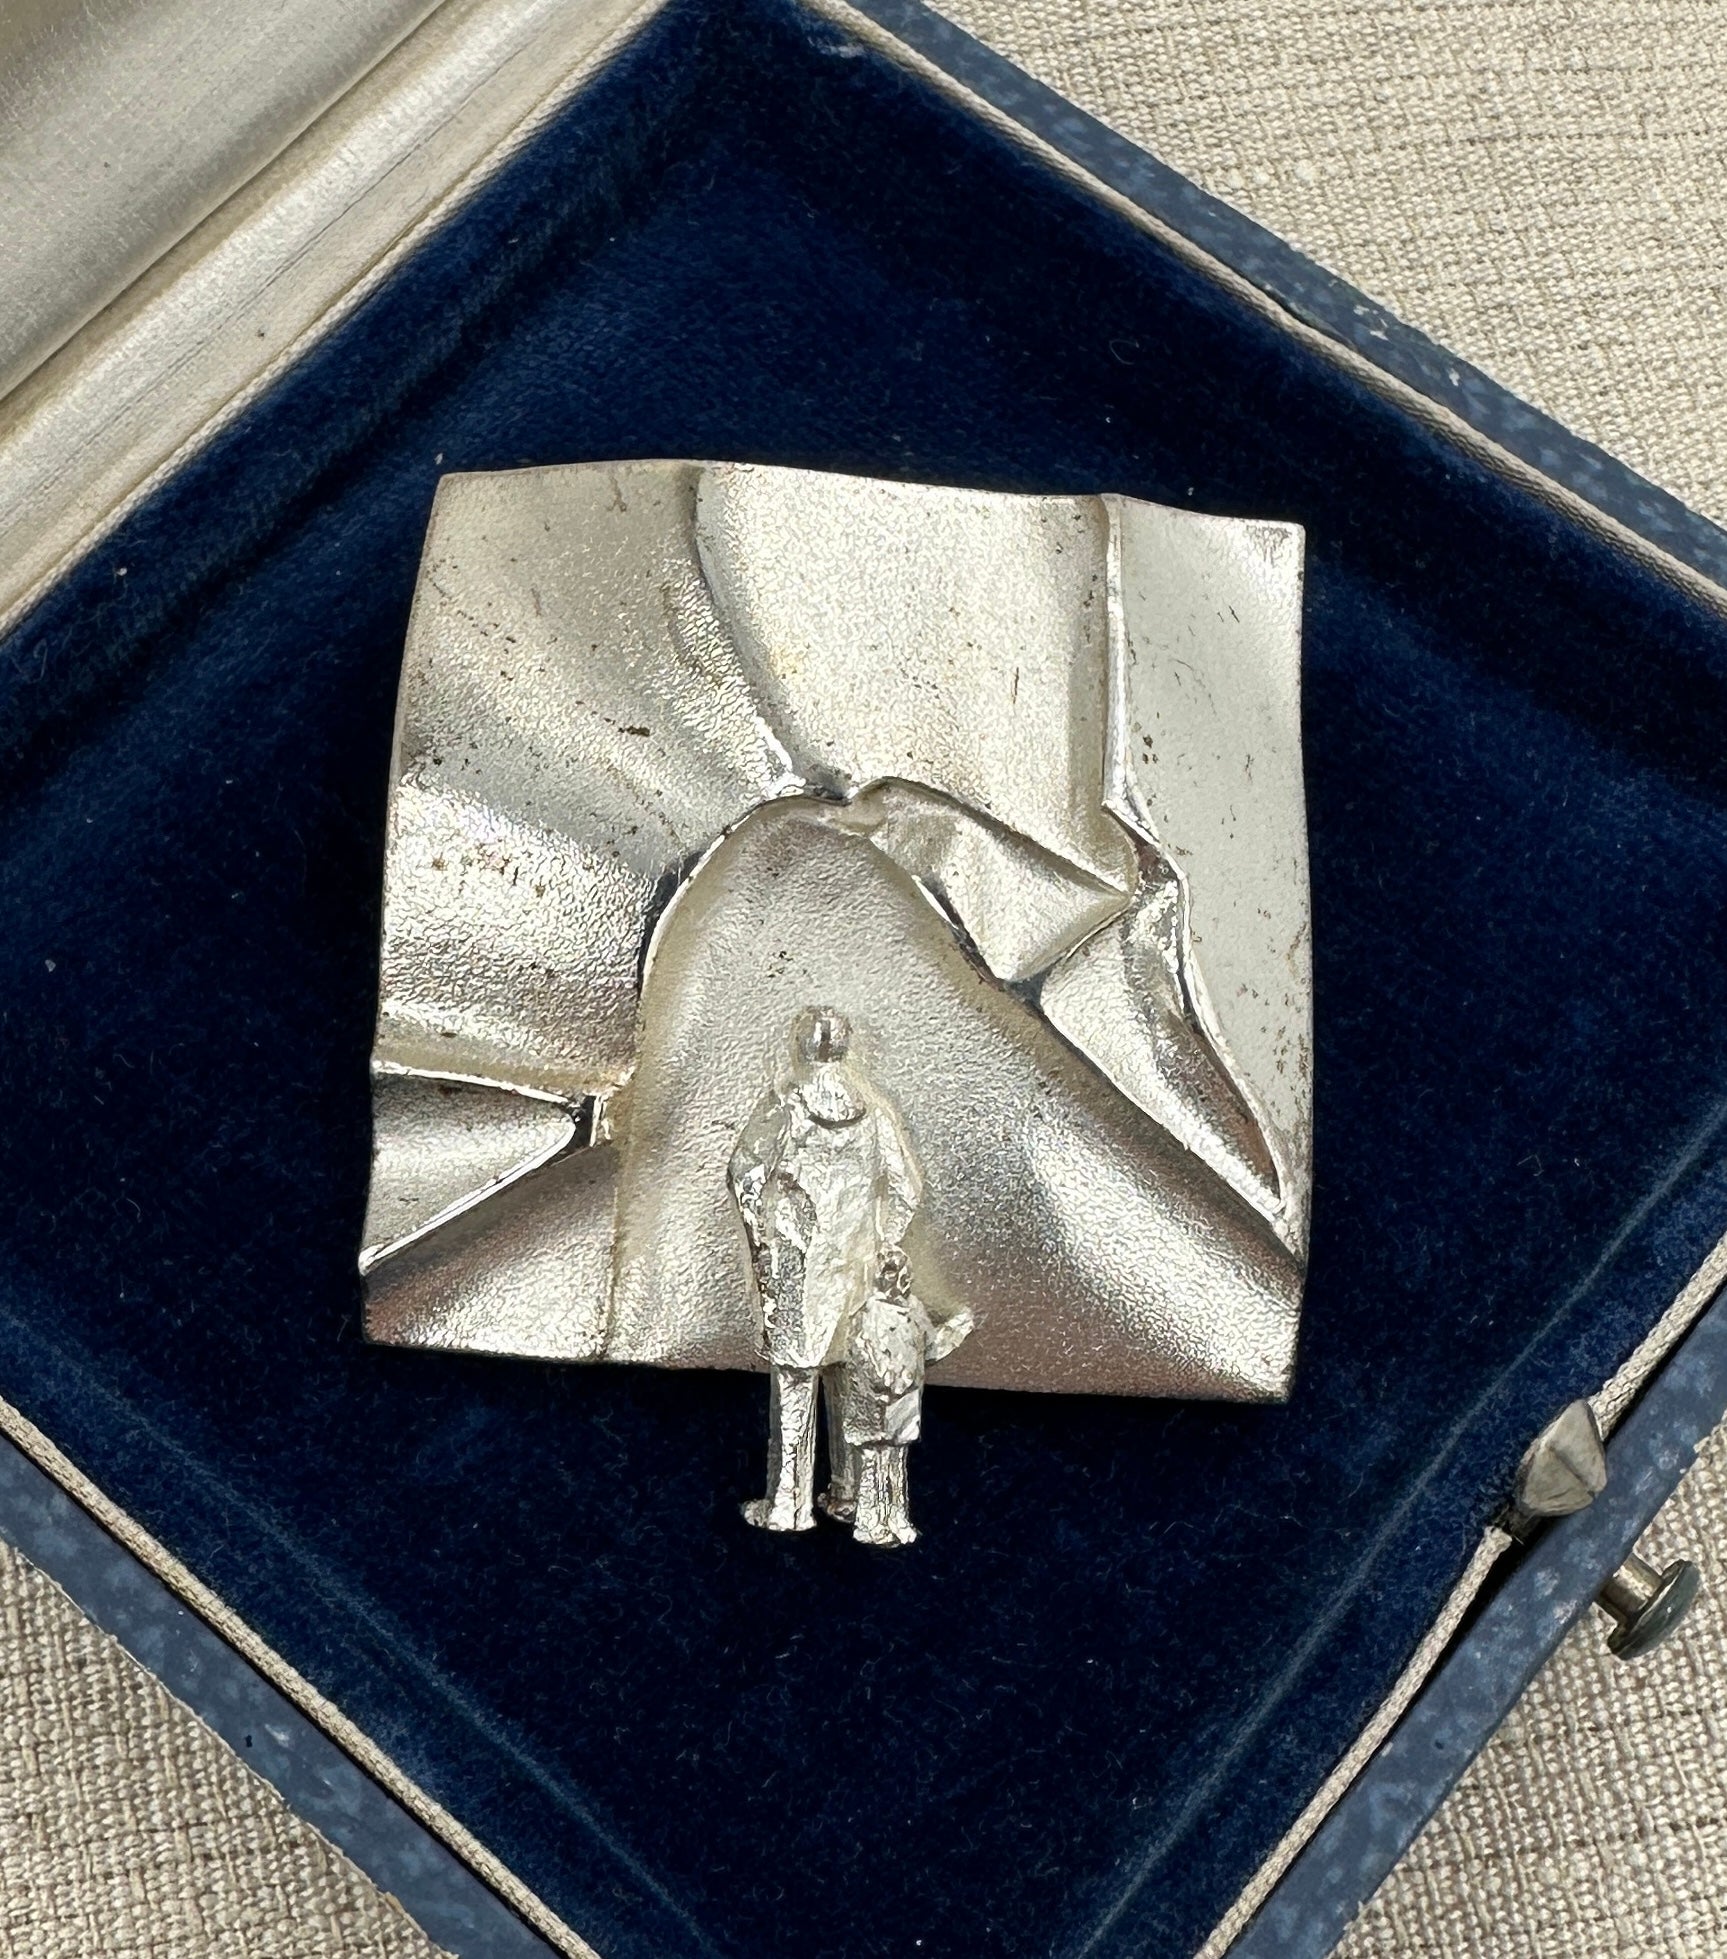 This is a stunning brooch by Björn Weckström for Lapponia Jewelry, from the Space Series, the vintage modernist sculptural sterling silver Man and Child brooch is a very rare Lapponia piece.
This is a superb museum quality Lapponia brooch from